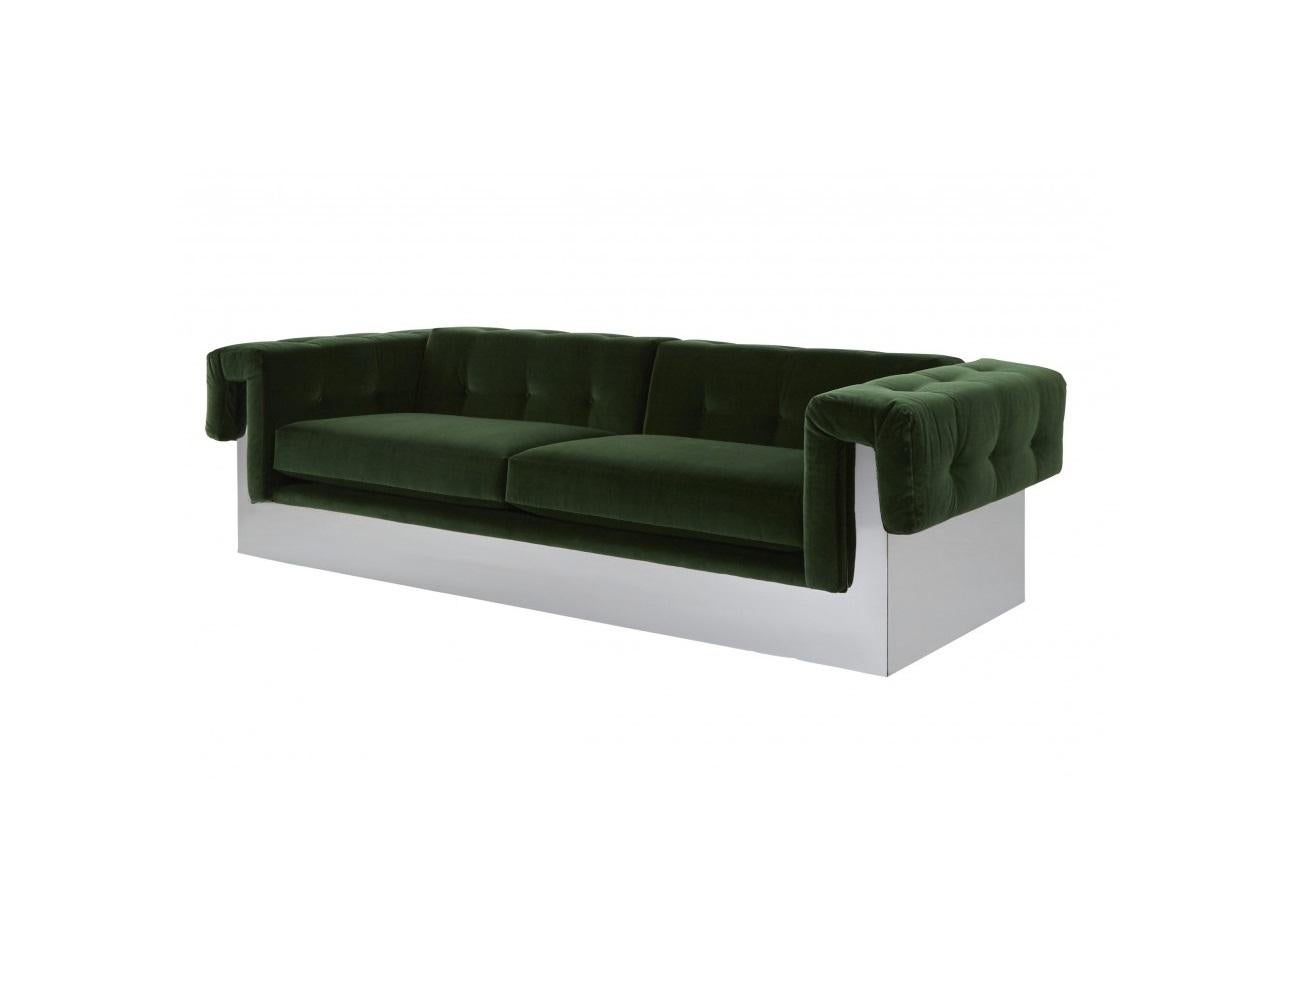 Milo Baughman Button-Tufted Green & Chrome Wrapped Sofa In Good Condition For Sale In Dallas, TX